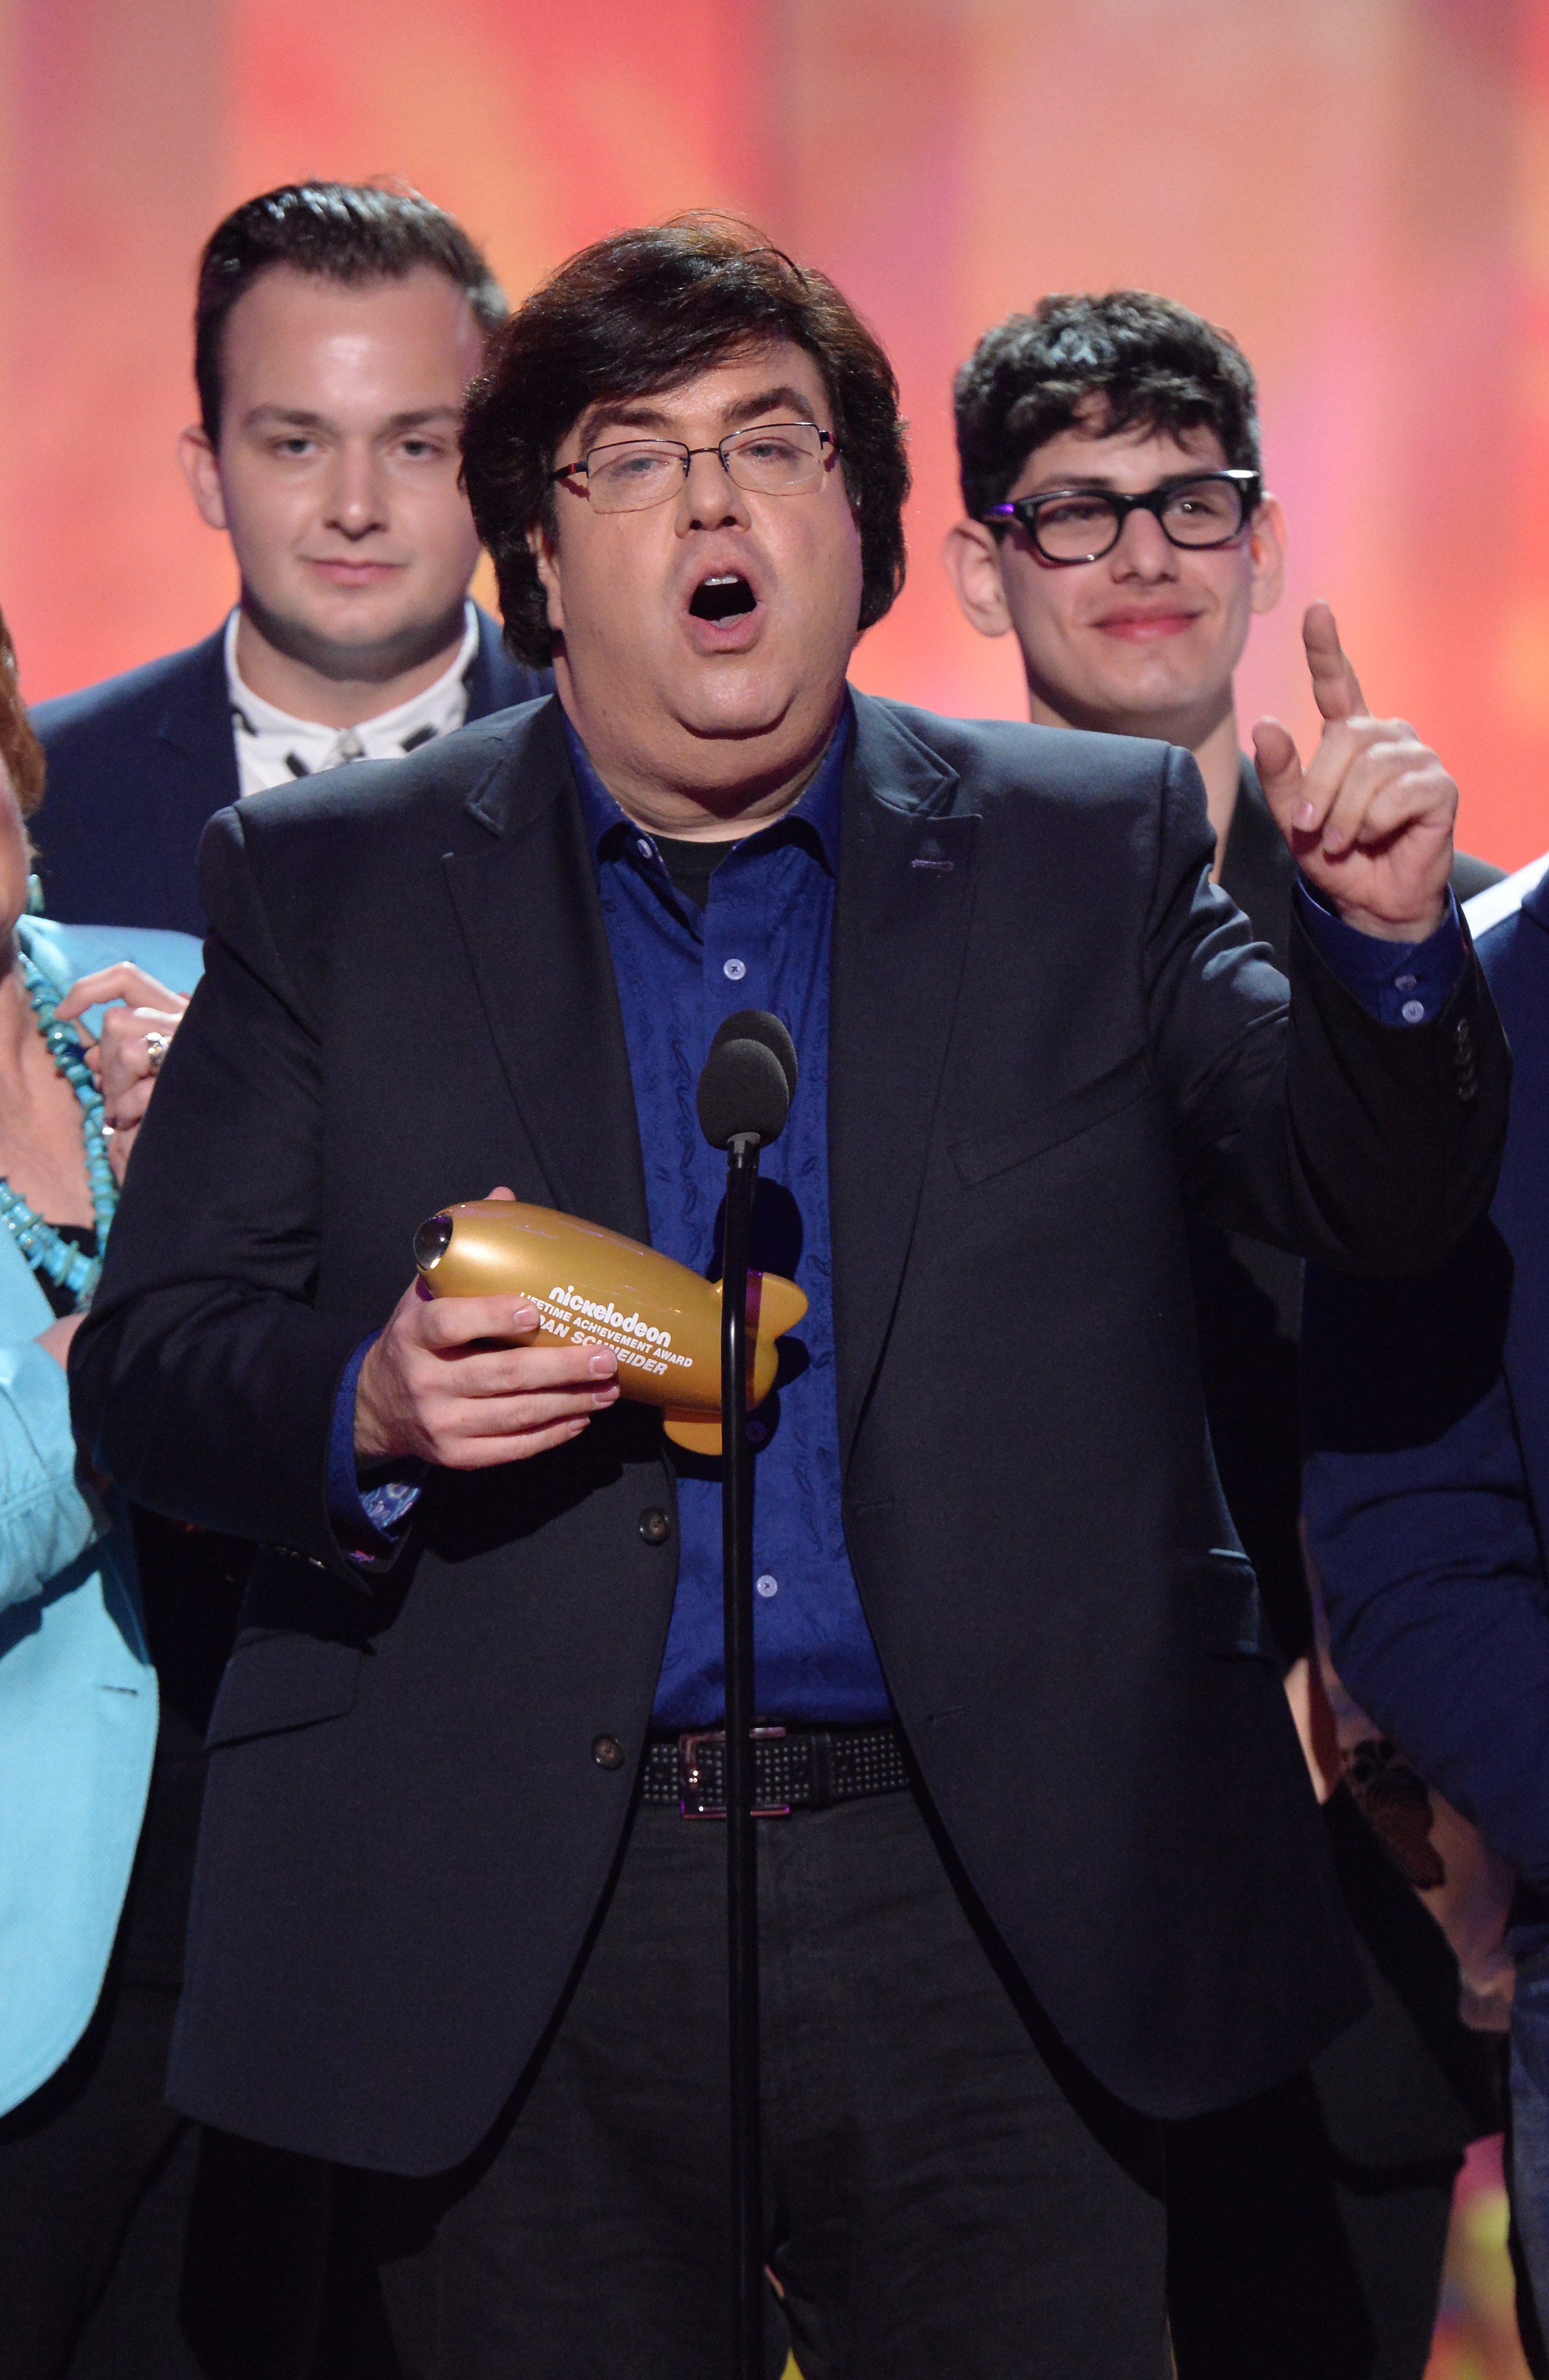 Former producer Dan Schneider faced serious allegations of how he treated underage actors